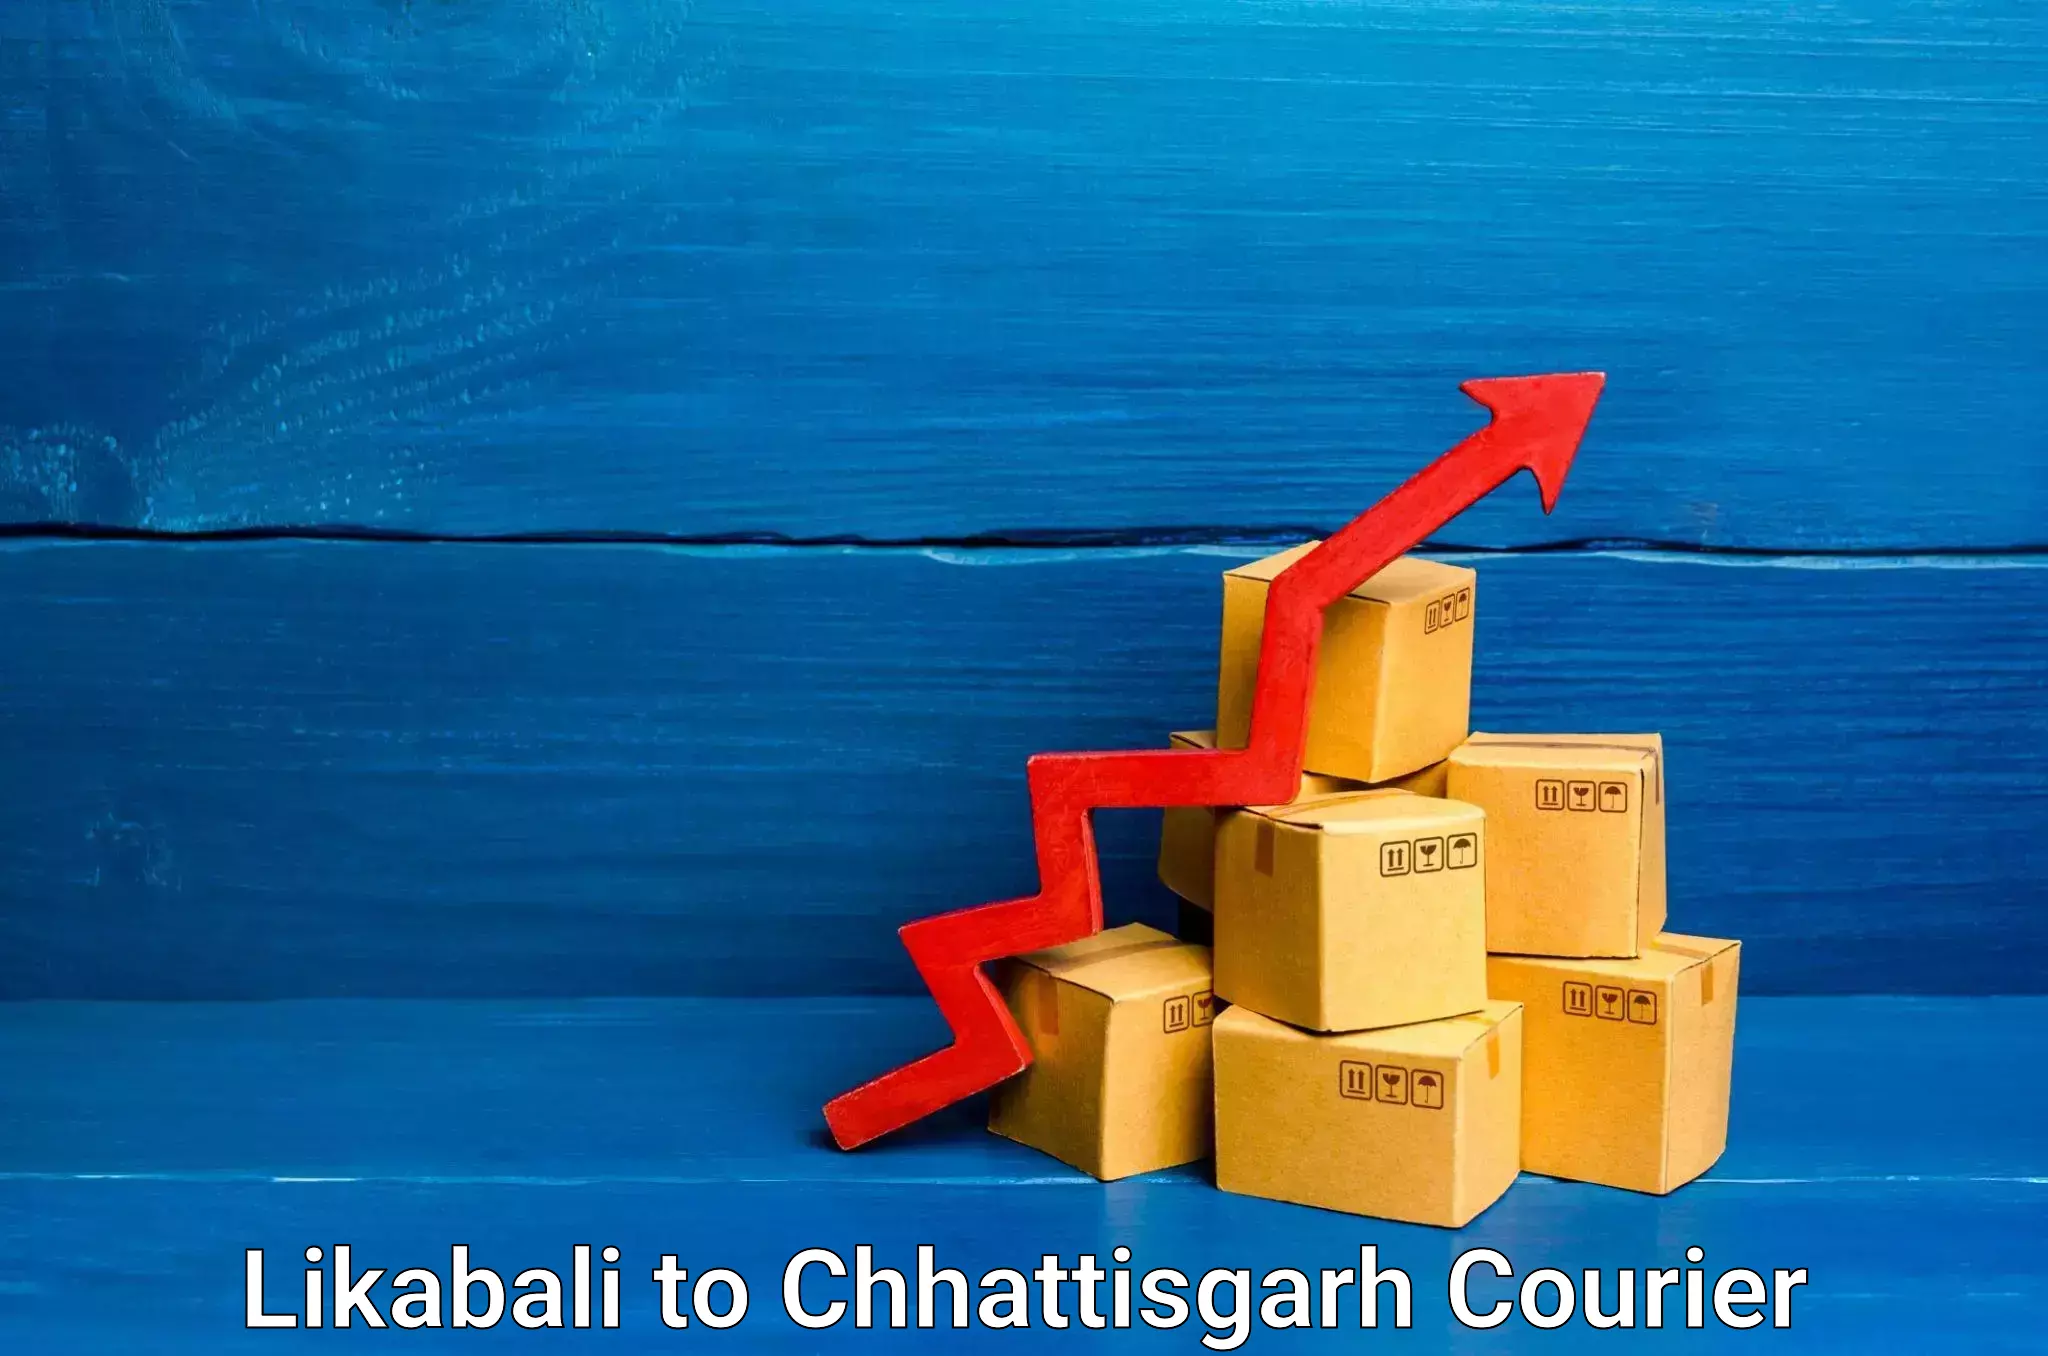 Comprehensive freight services Likabali to Mahasamund